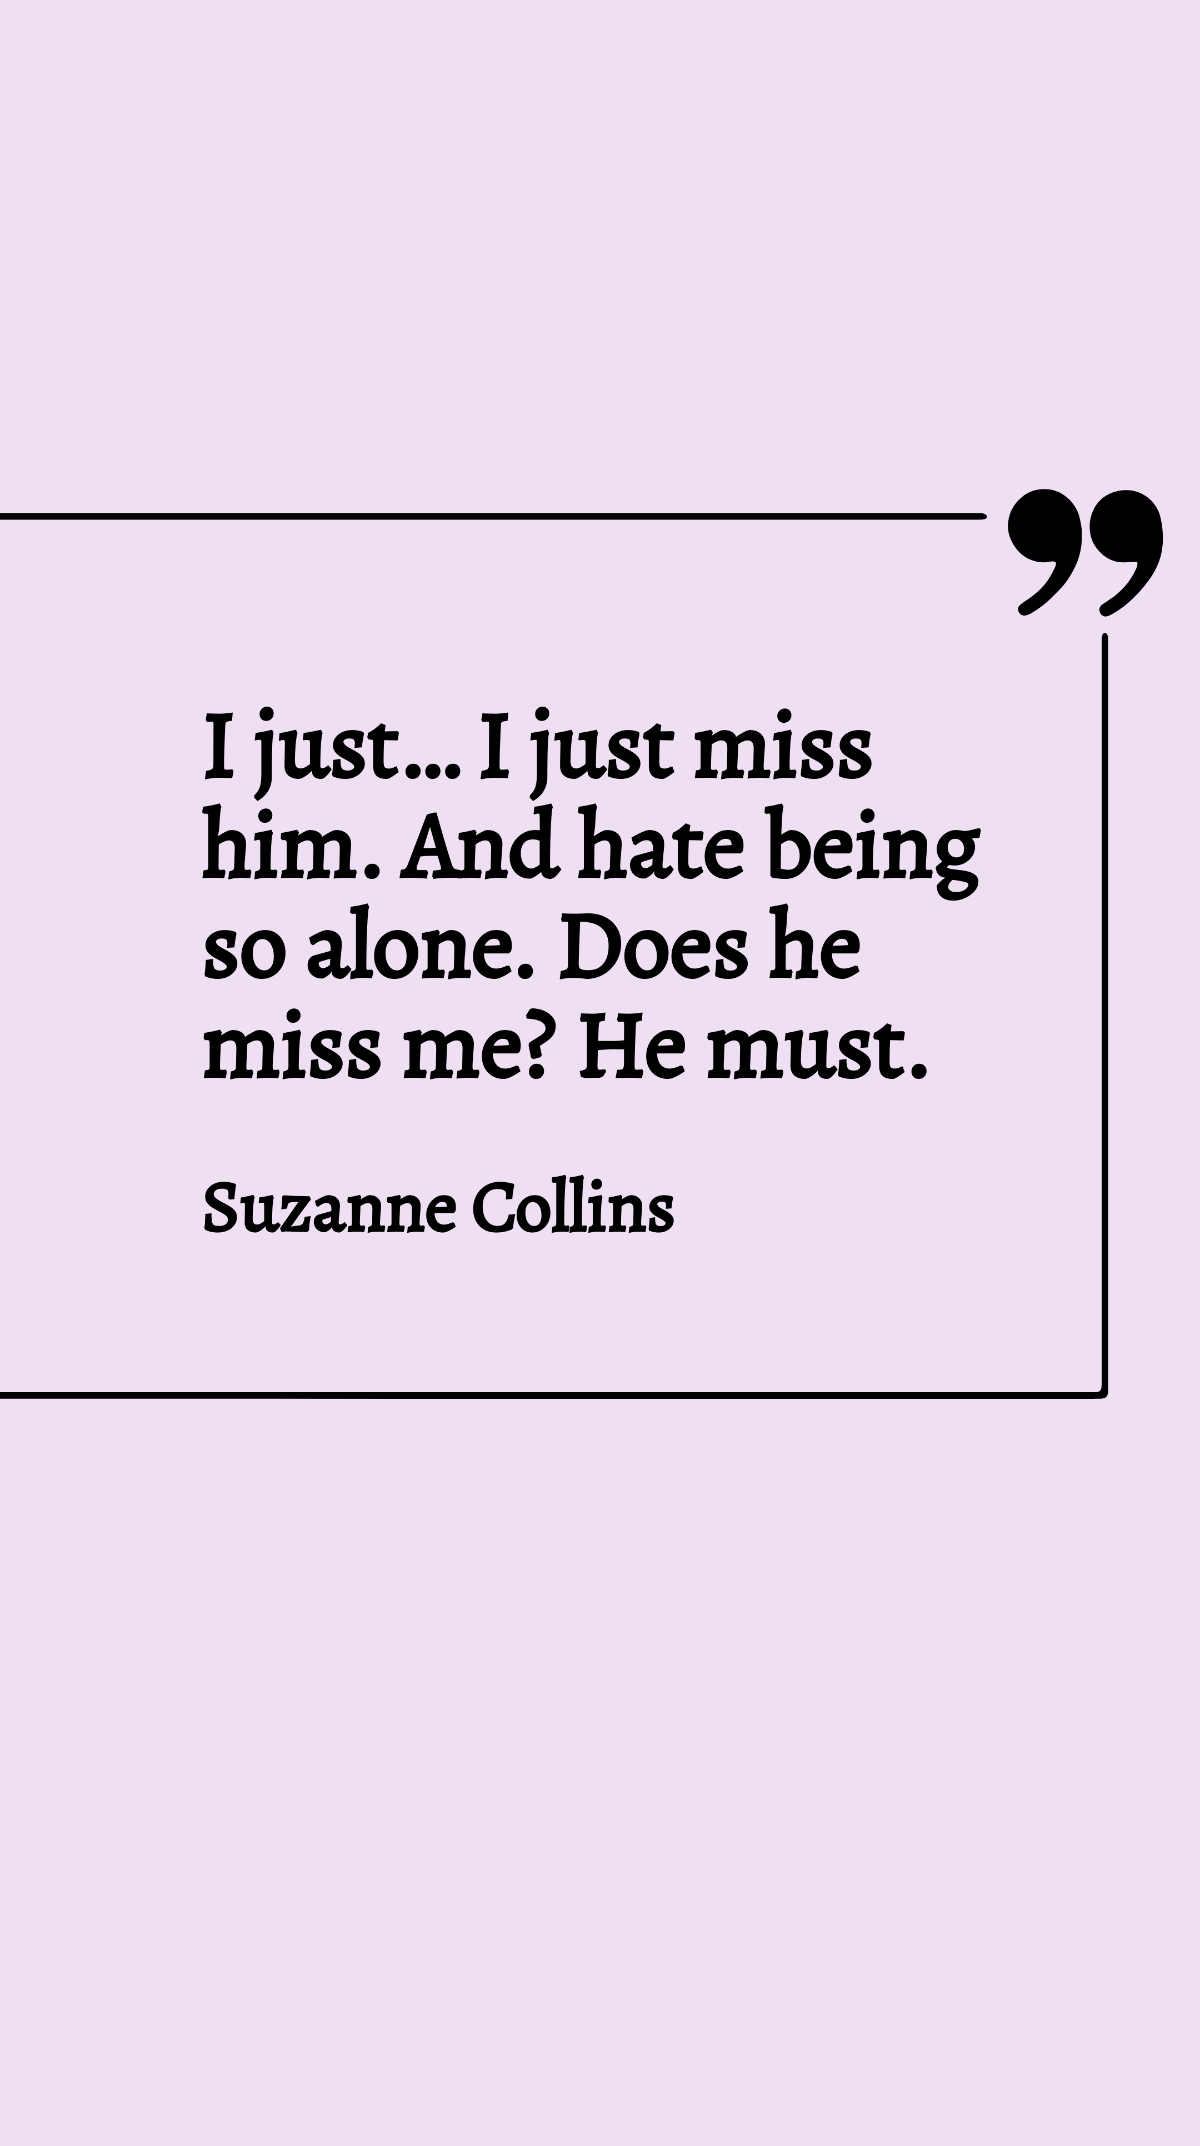 Suzanne Collins - I just… I just miss him. And hate being so alone. Does he miss me? He must. Template